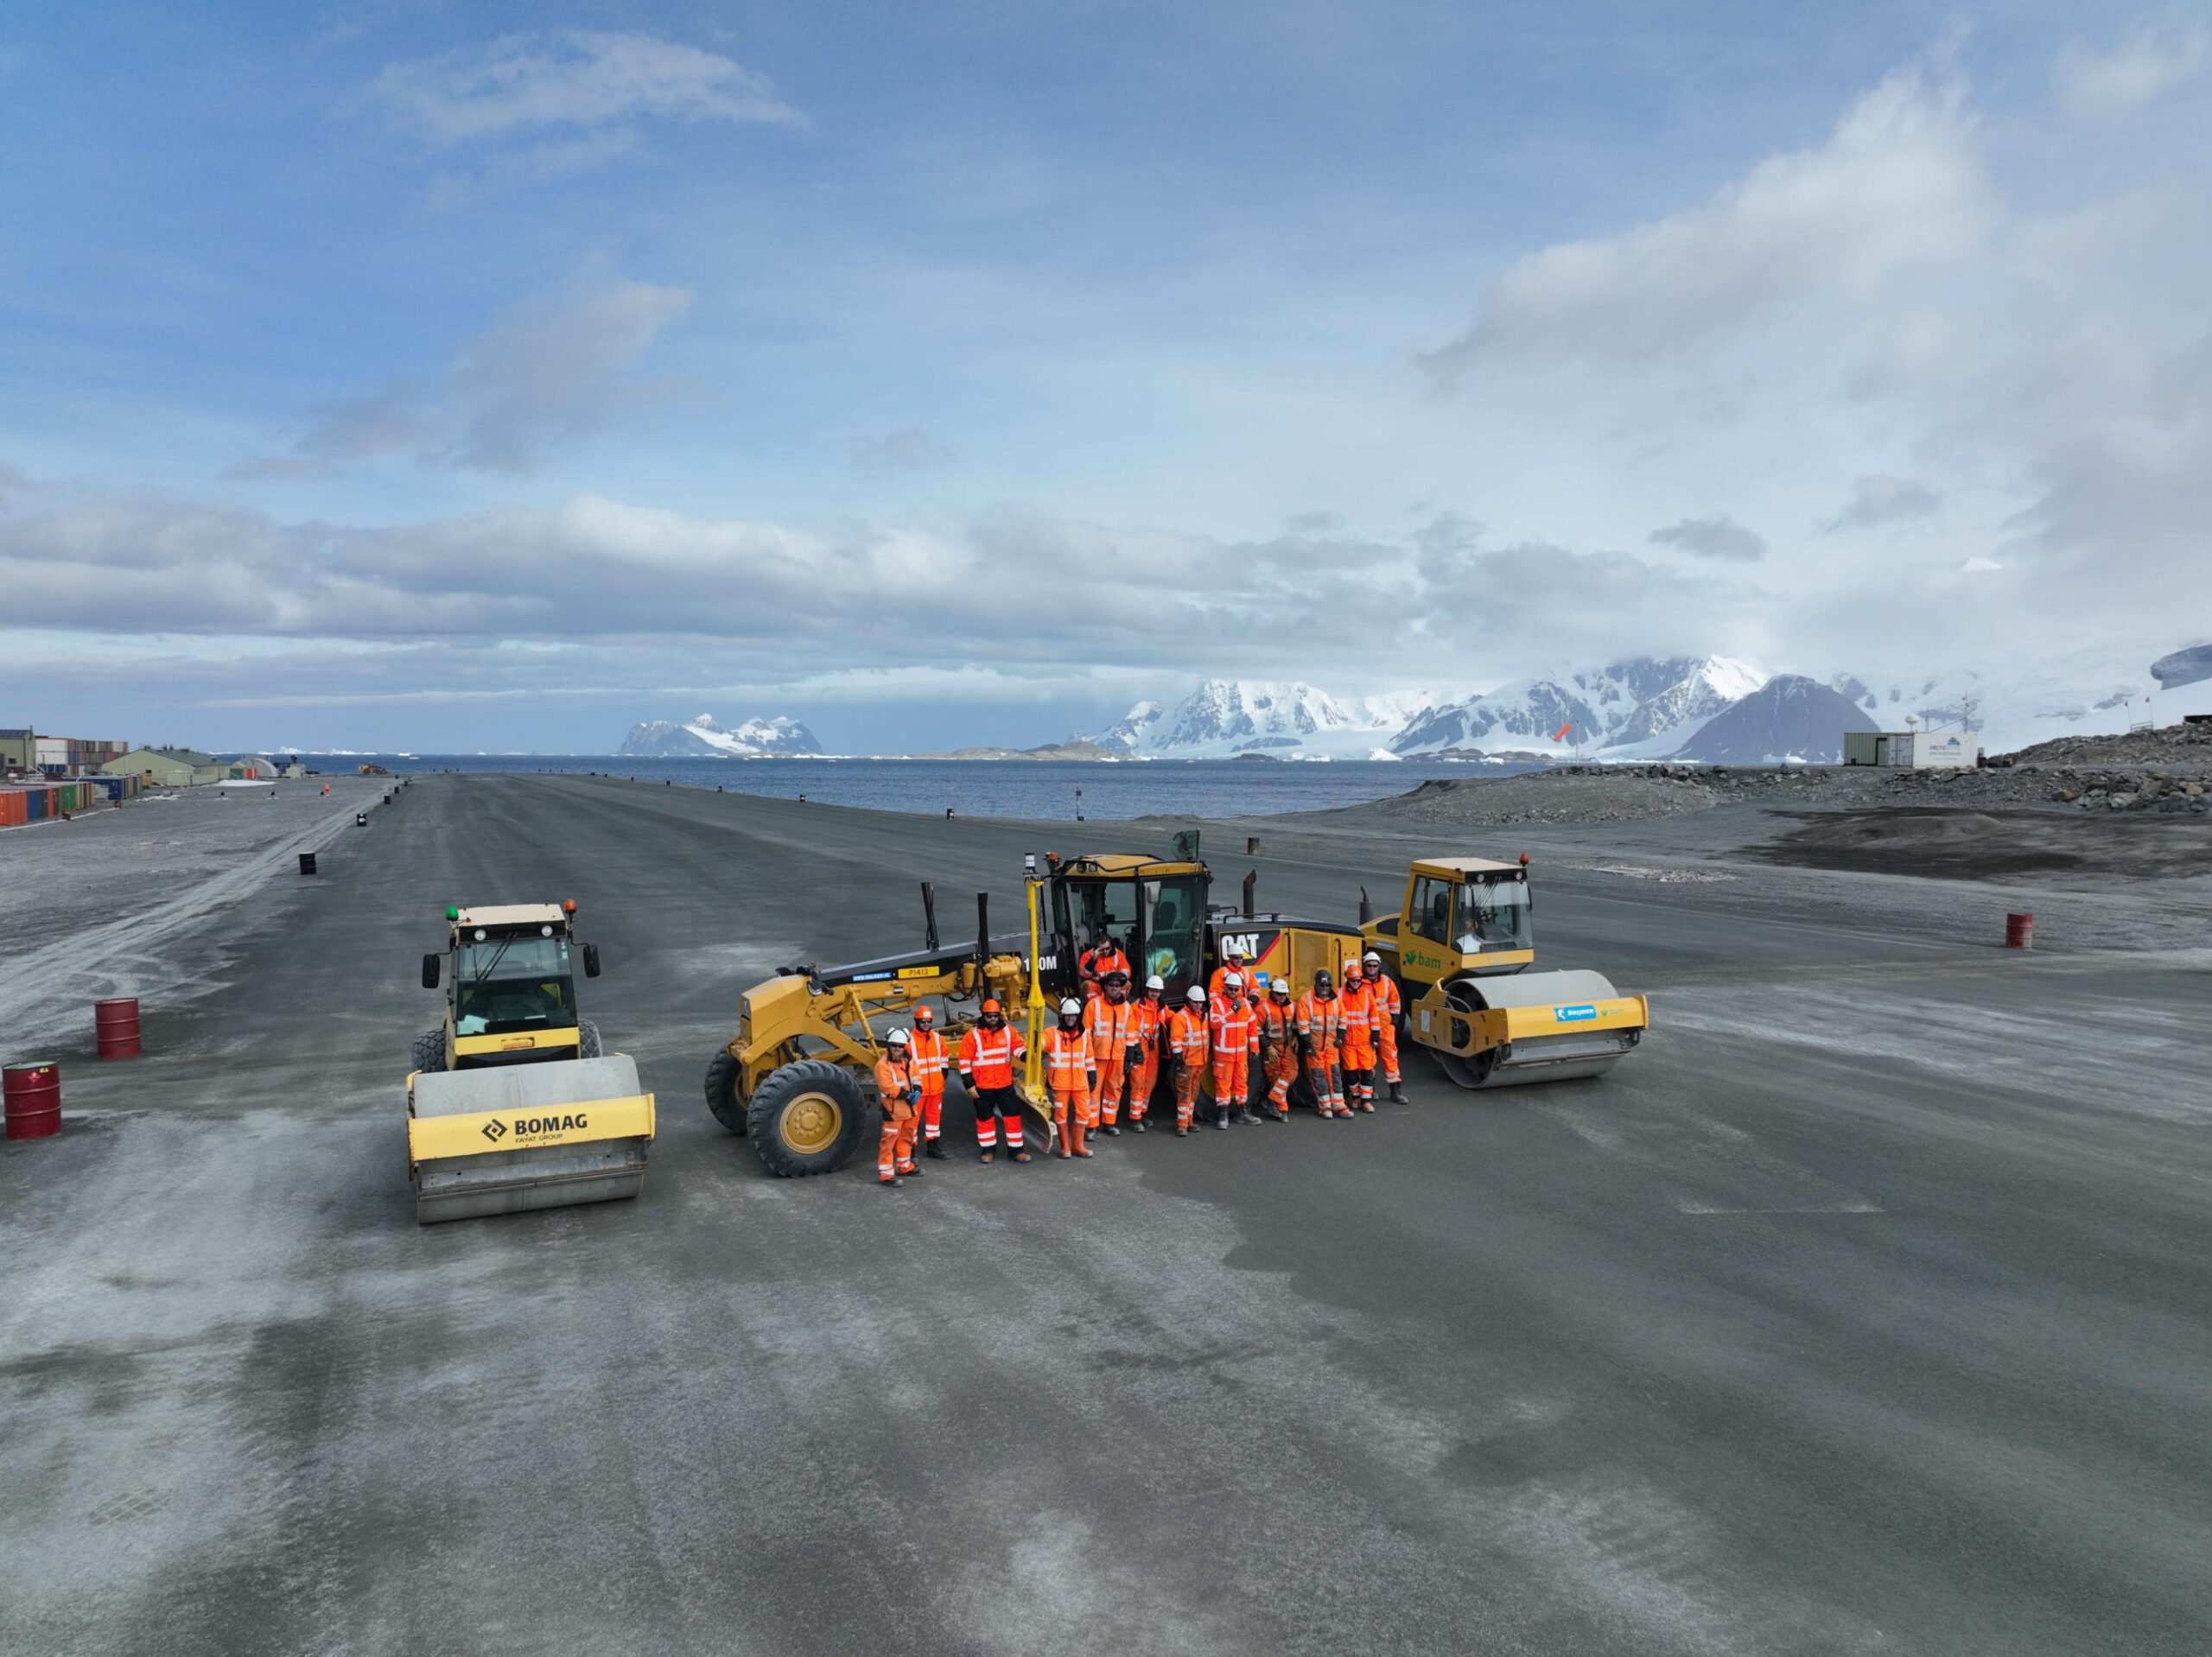 group of people standing on a runway by a consturction vehicle